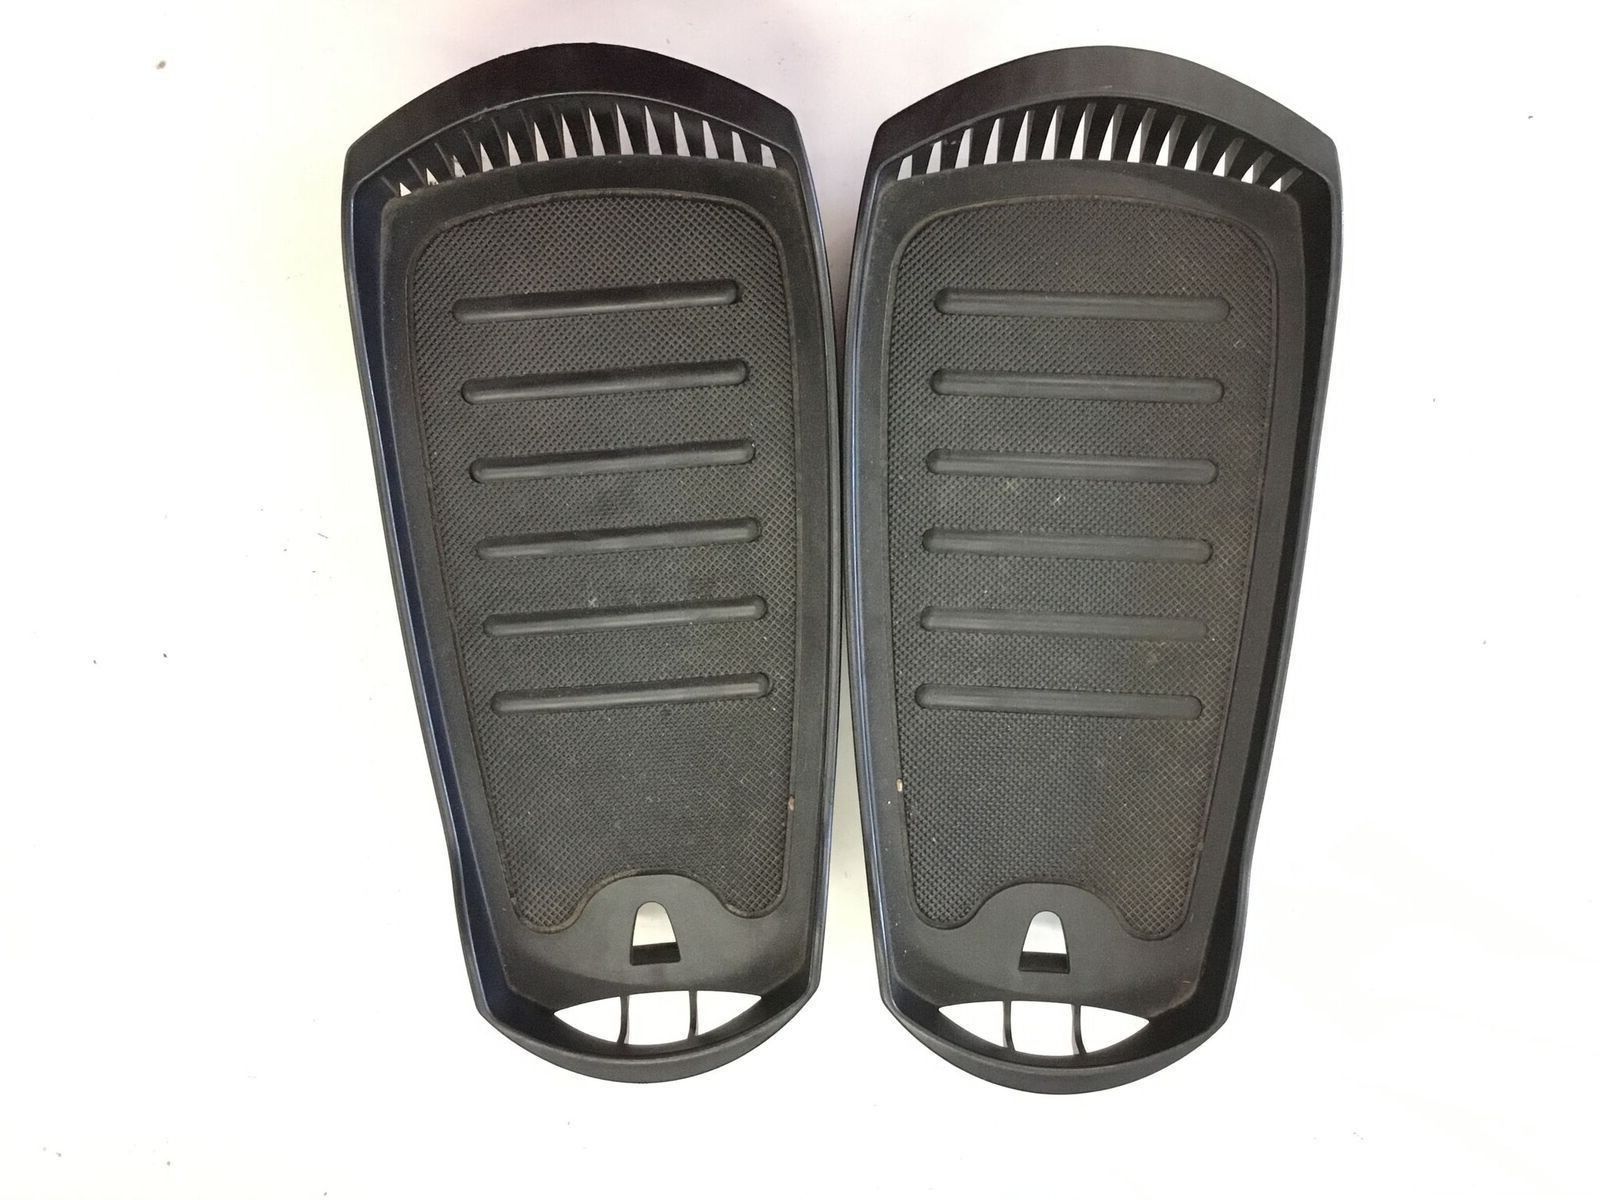 SportsArt Commercial Elliptical Plastic Foot Pedal Pad Left and Right 8300-78 (Used)